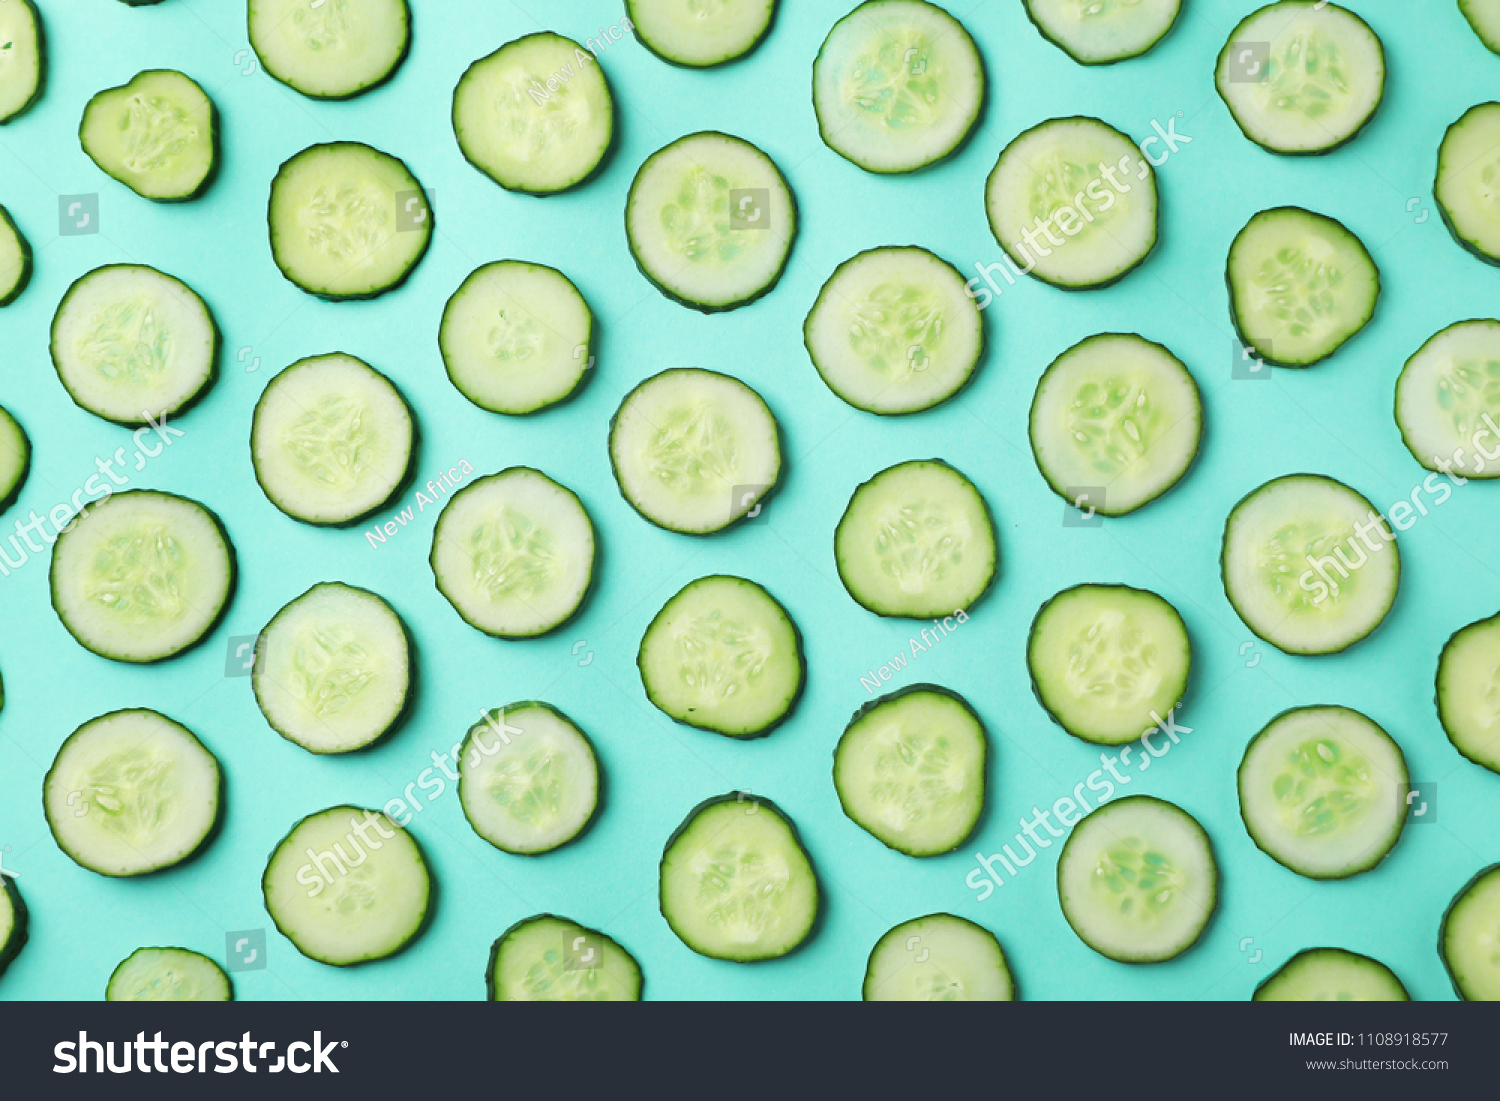 Flat lay composition with slices of cucumber on color background #1108918577